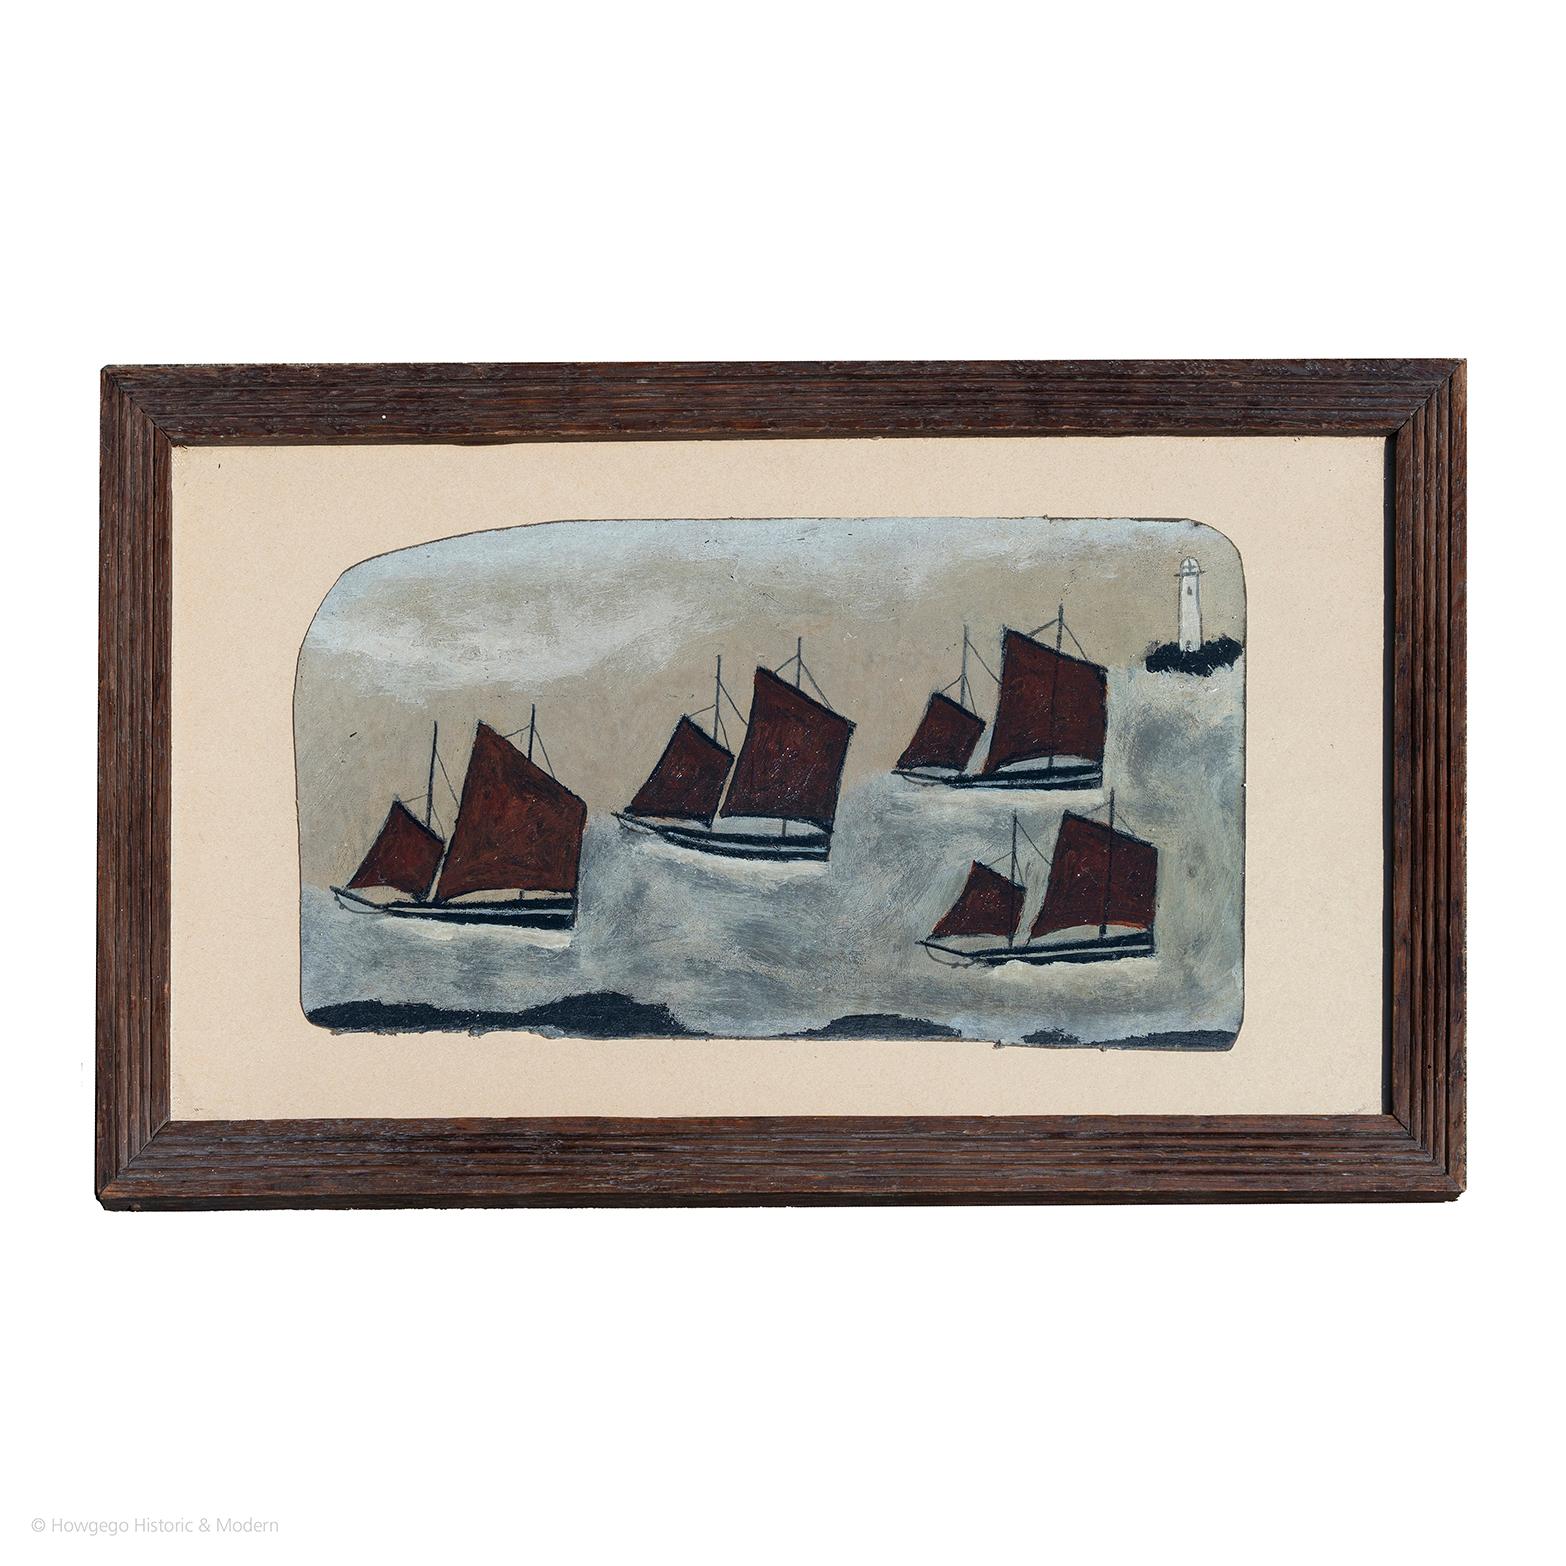 Four Cornish luggers with a lighthouse on the horizon
Oil on cardboard
Characterful naive picture in the spirit of Alfred Wallis

Measures: Board length 28cm., 11